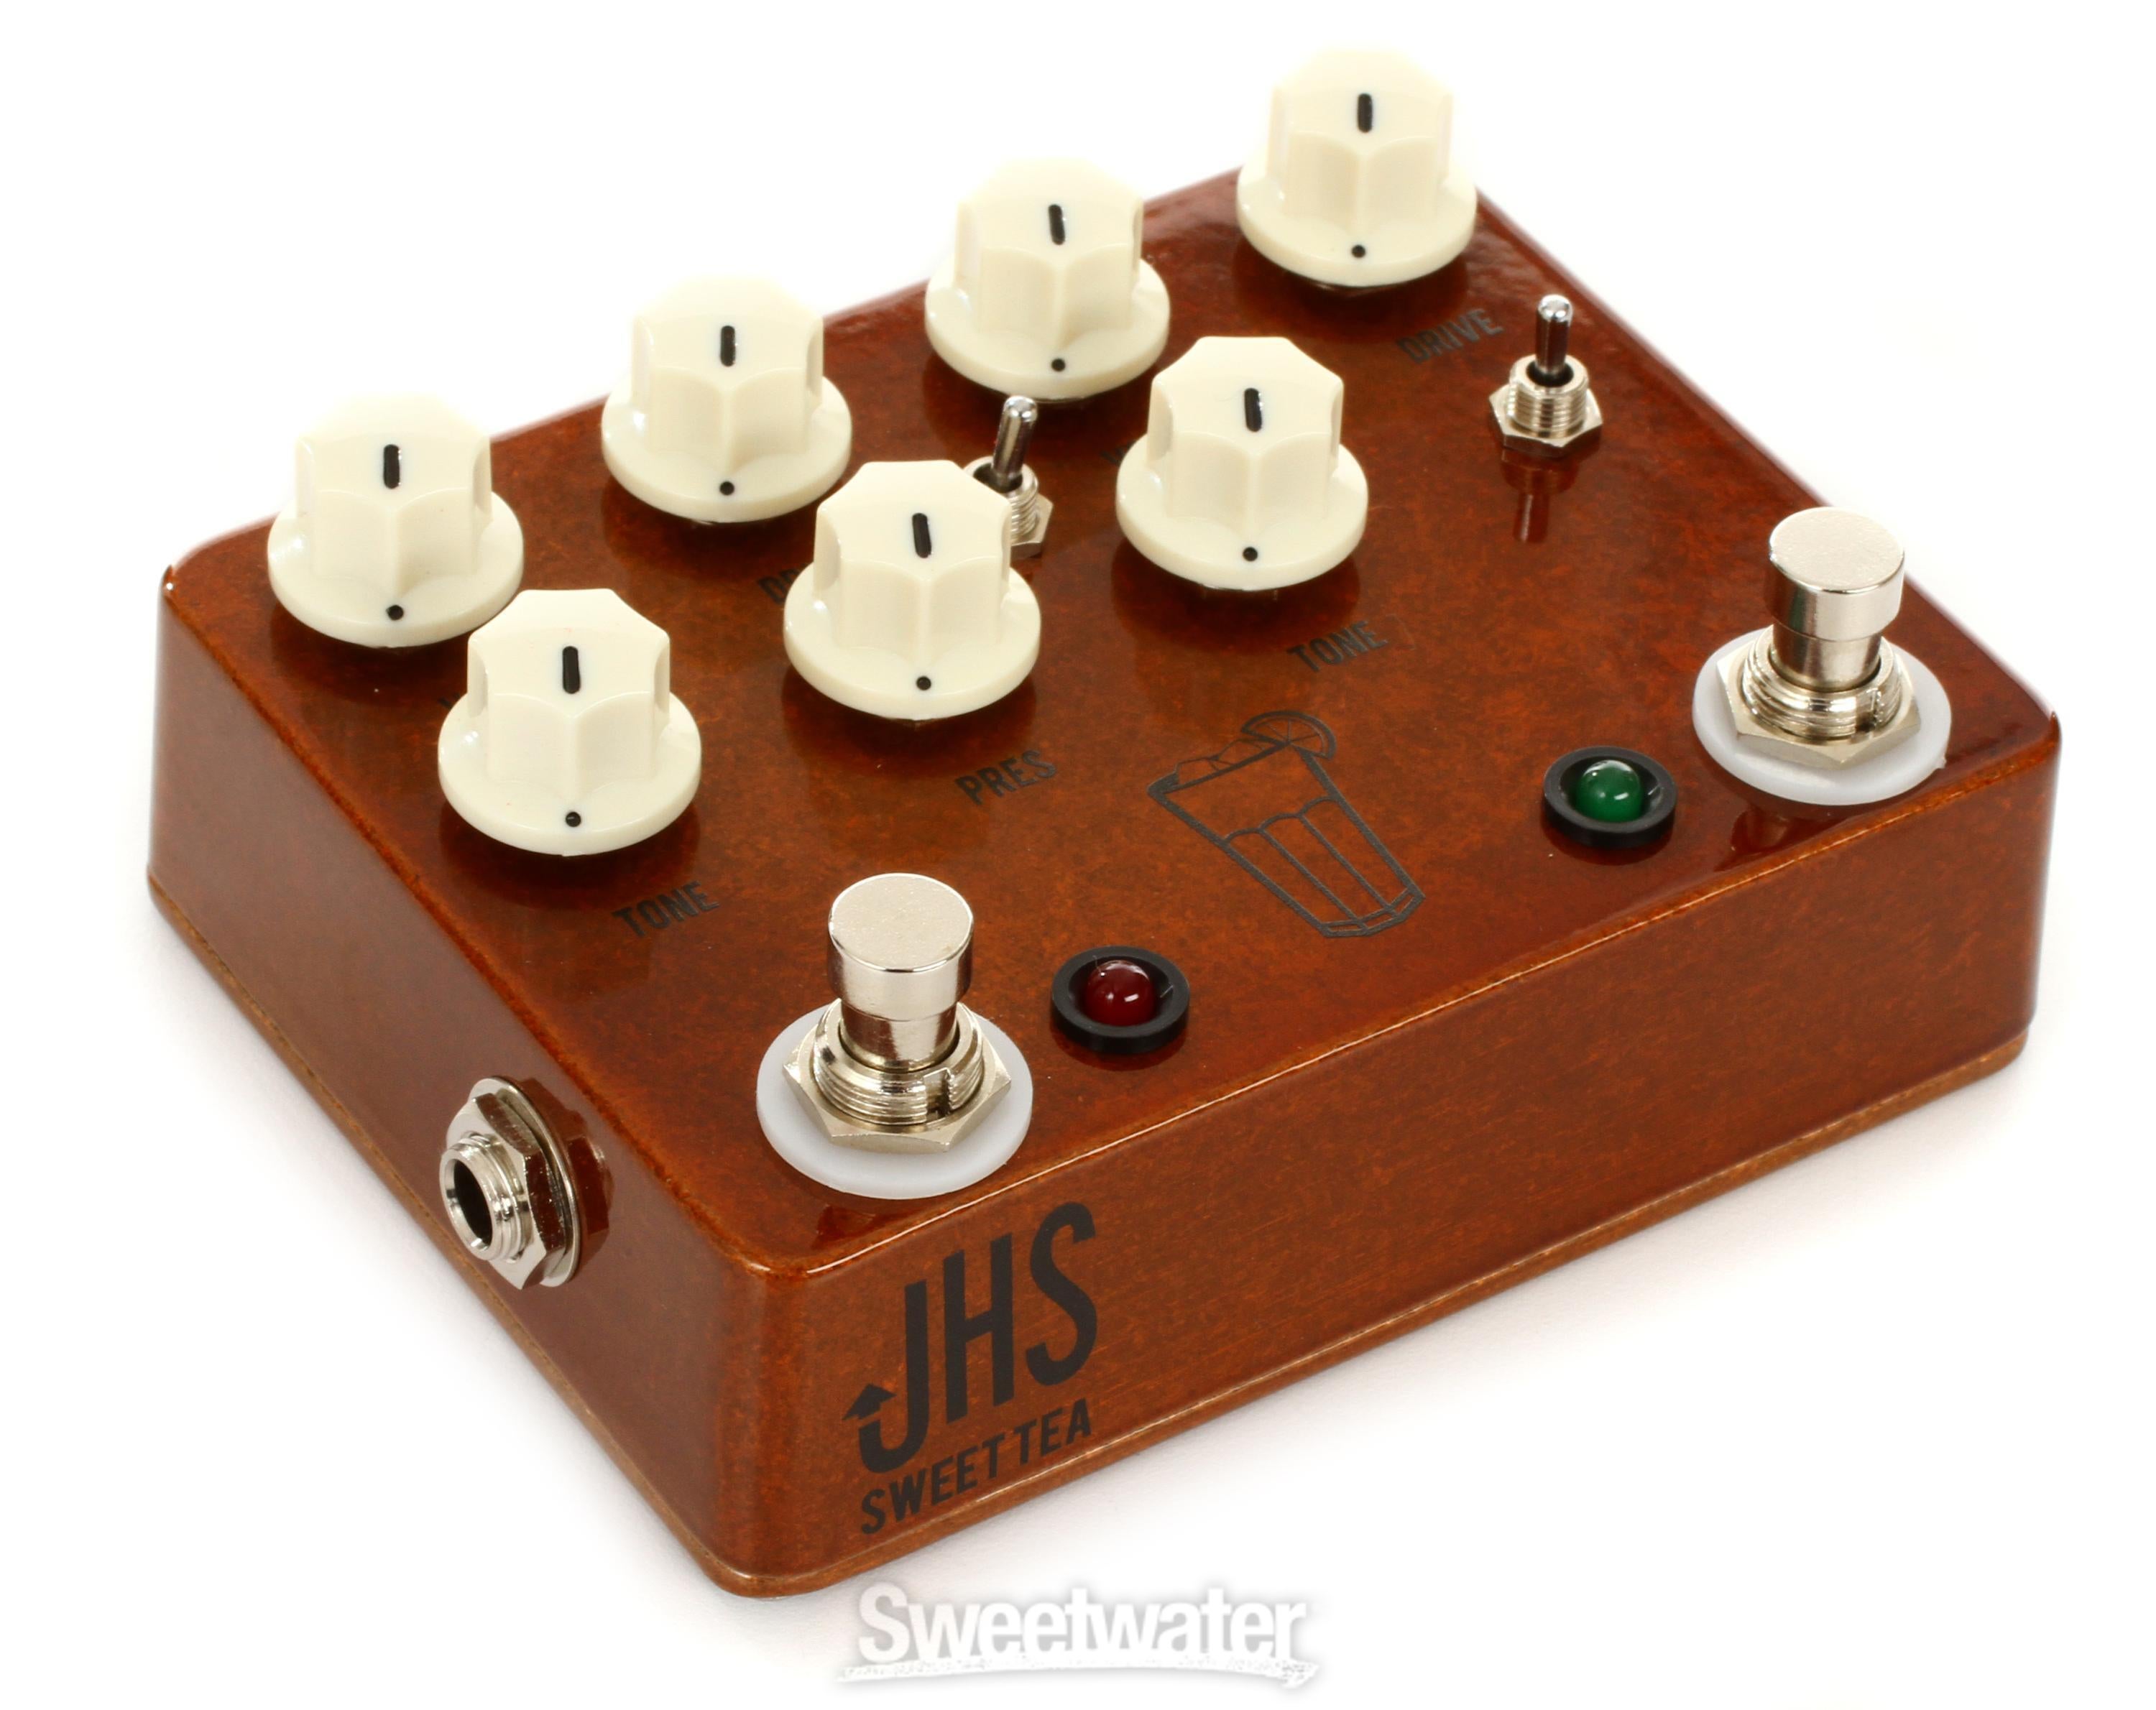 JHS Sweet Tea 2-in-1 Dual Overdrive Pedal Reviews | Sweetwater